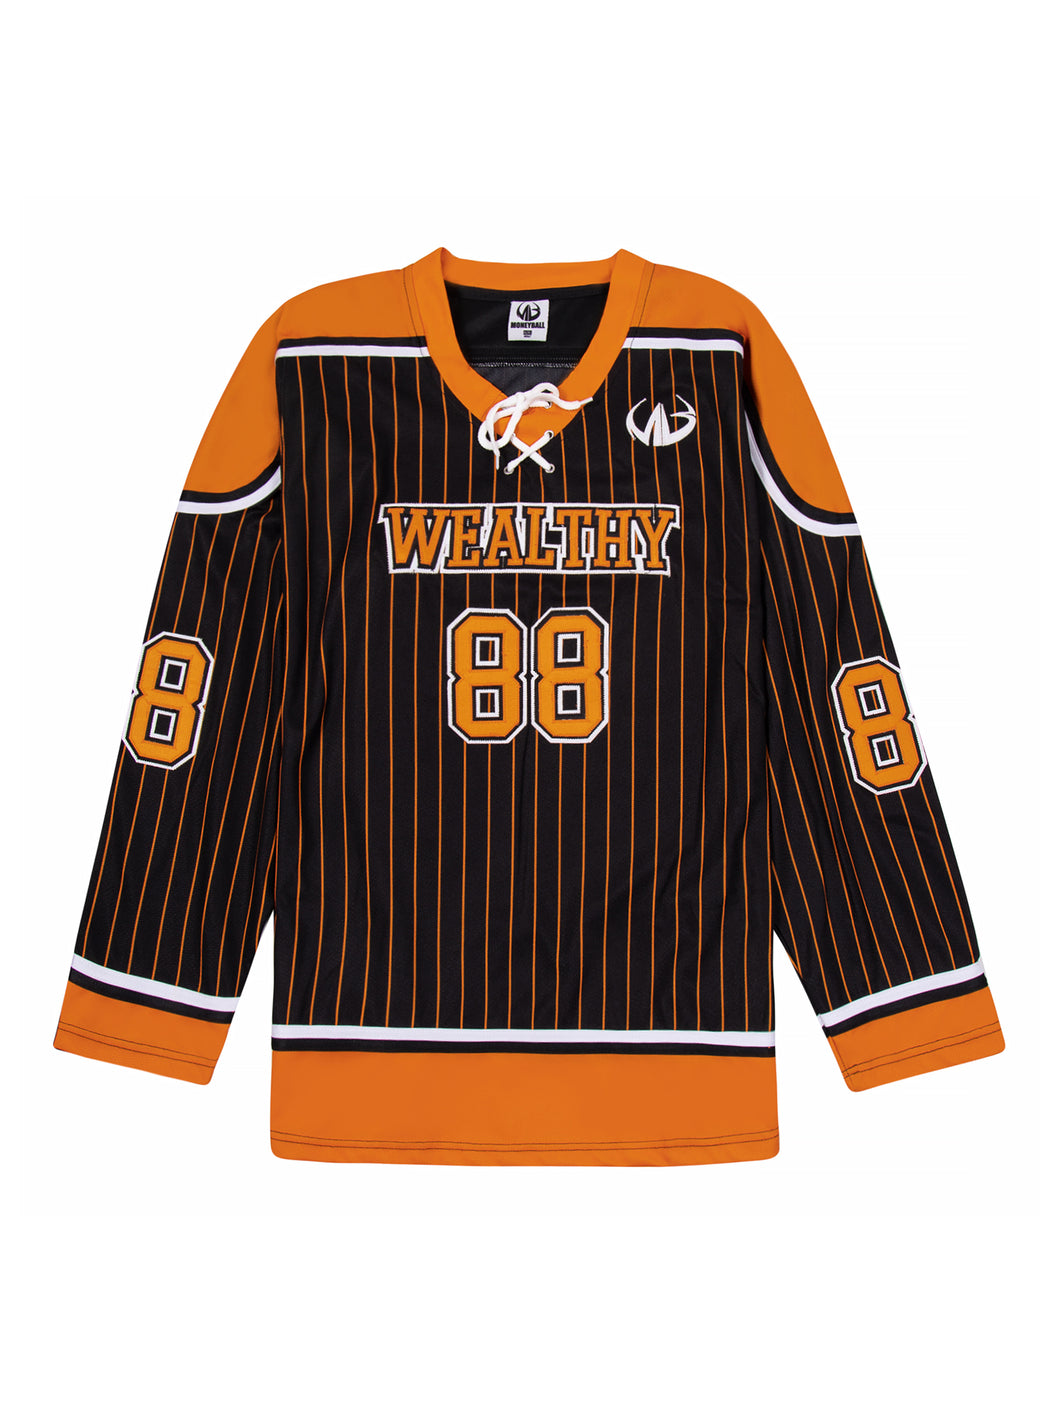 Exclusive Wealthy Hockey Jersey